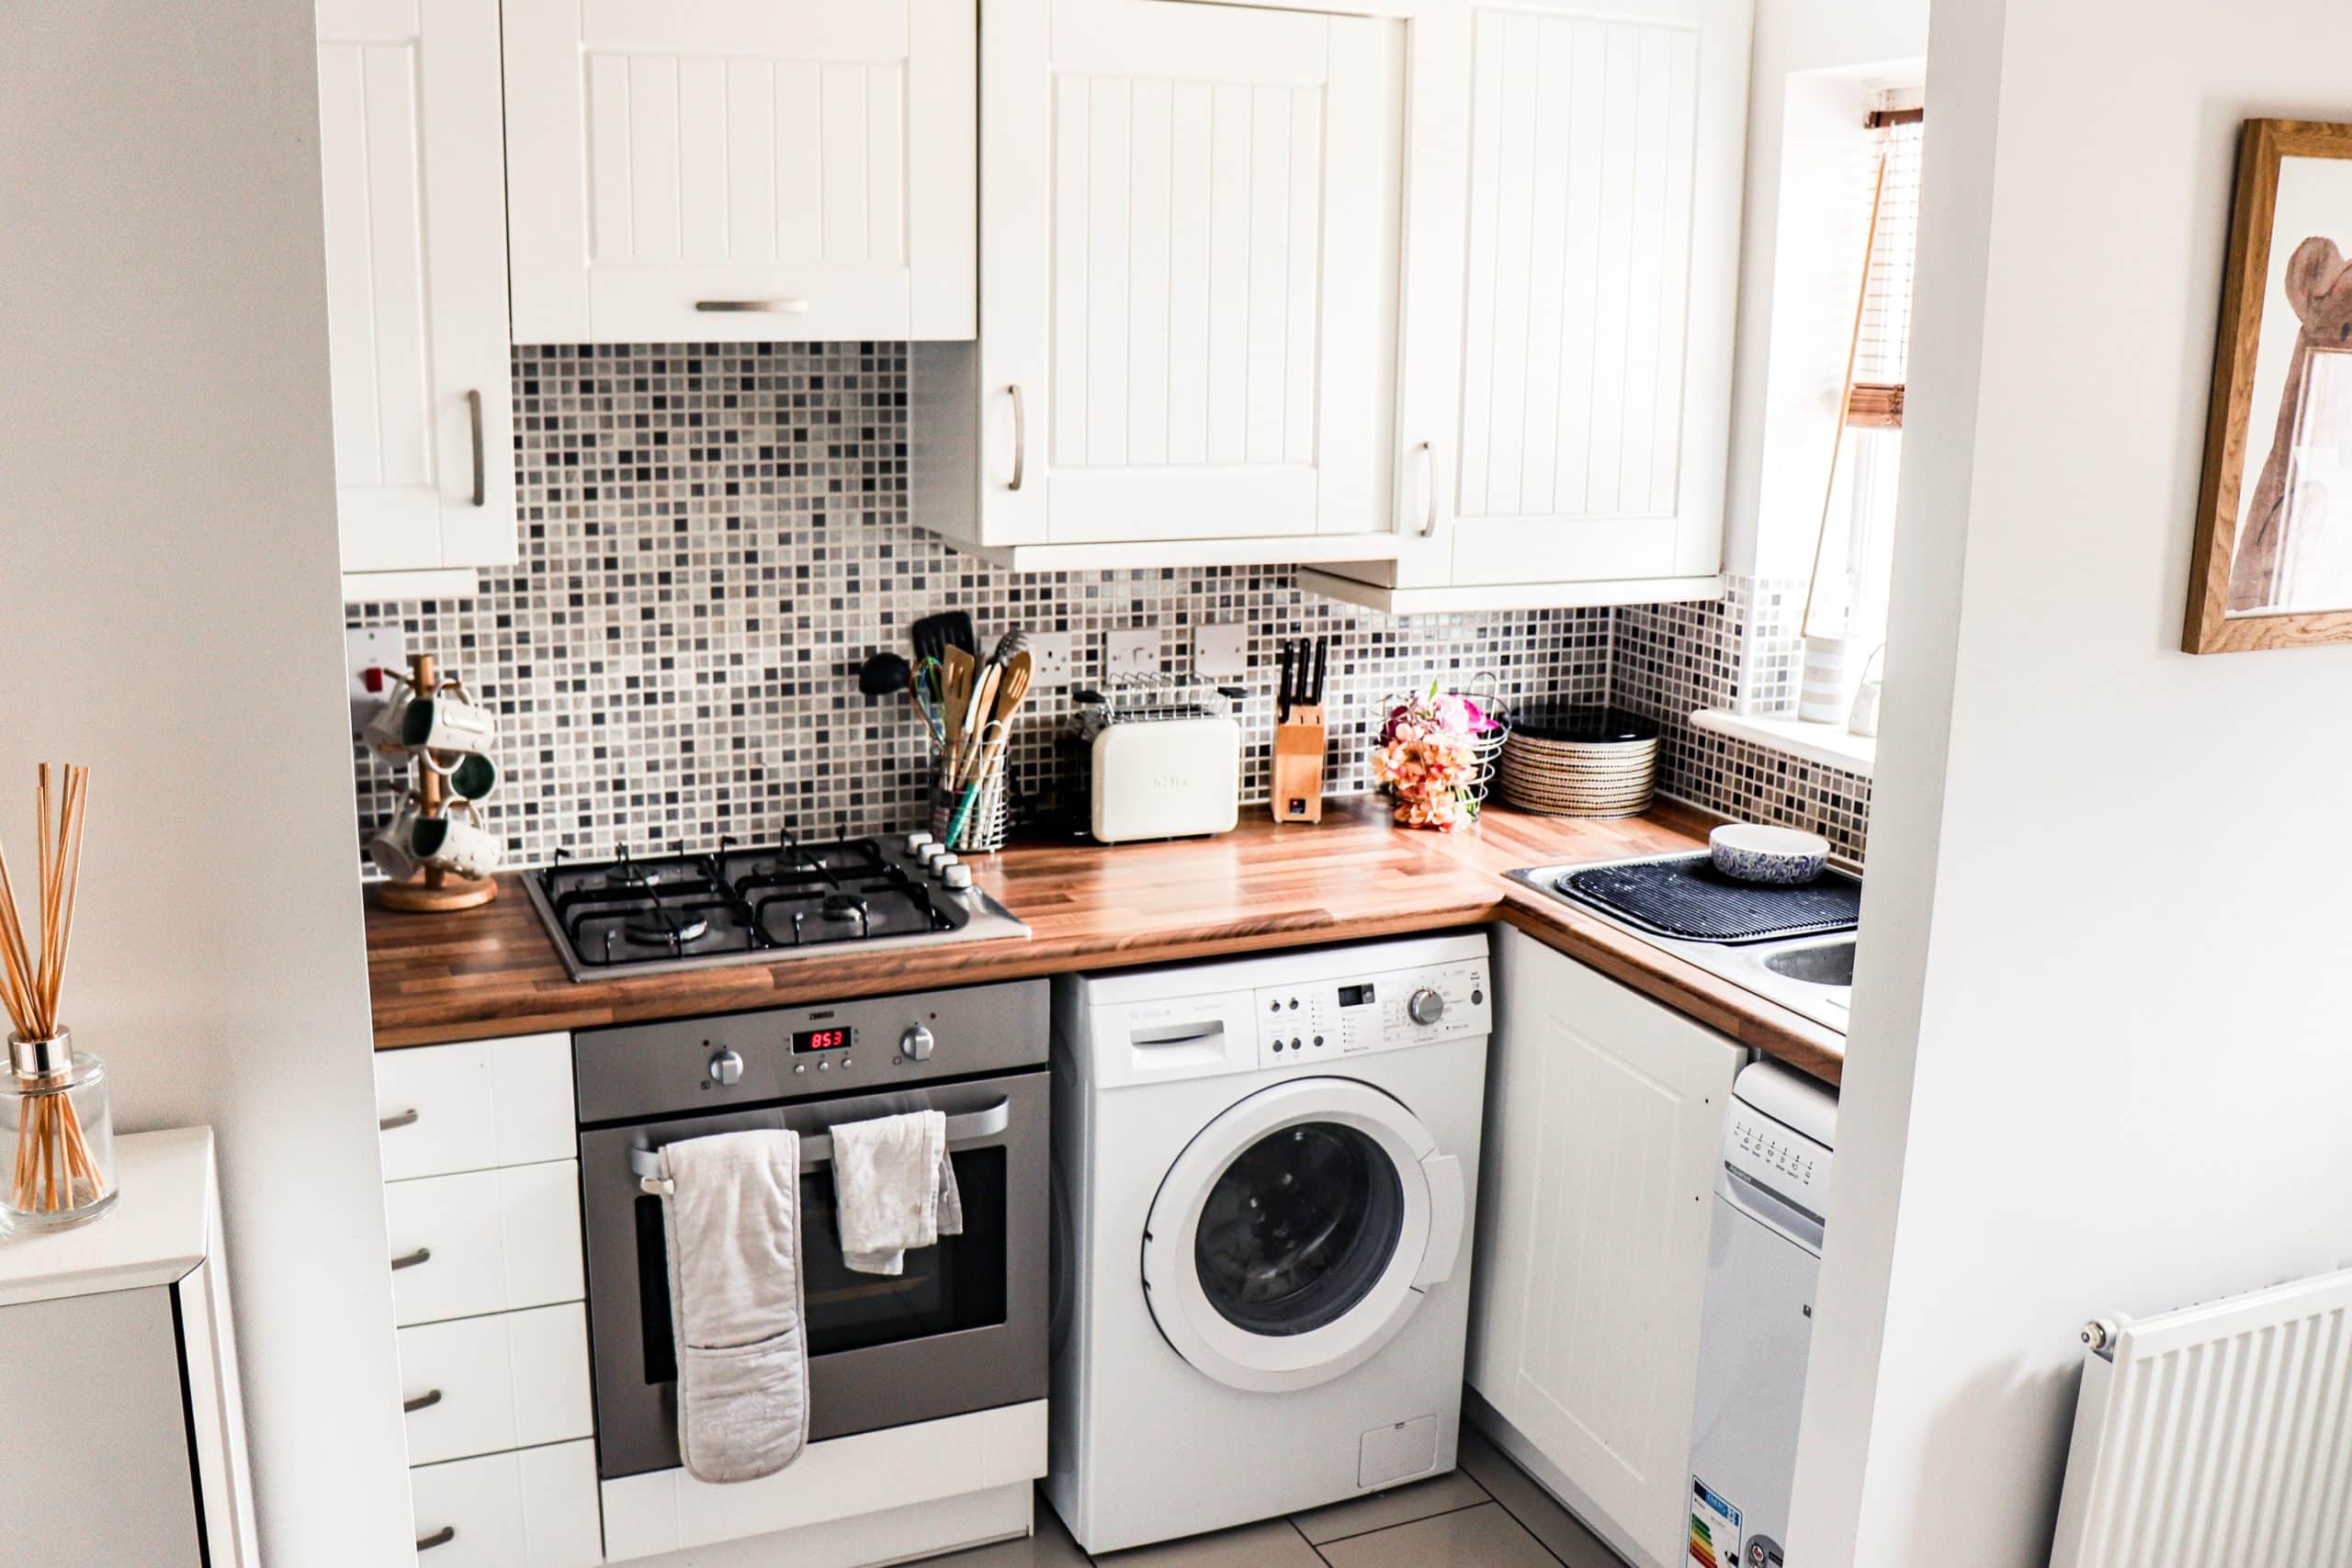 Laundry Room Organization Ideas: Maximize Your Space